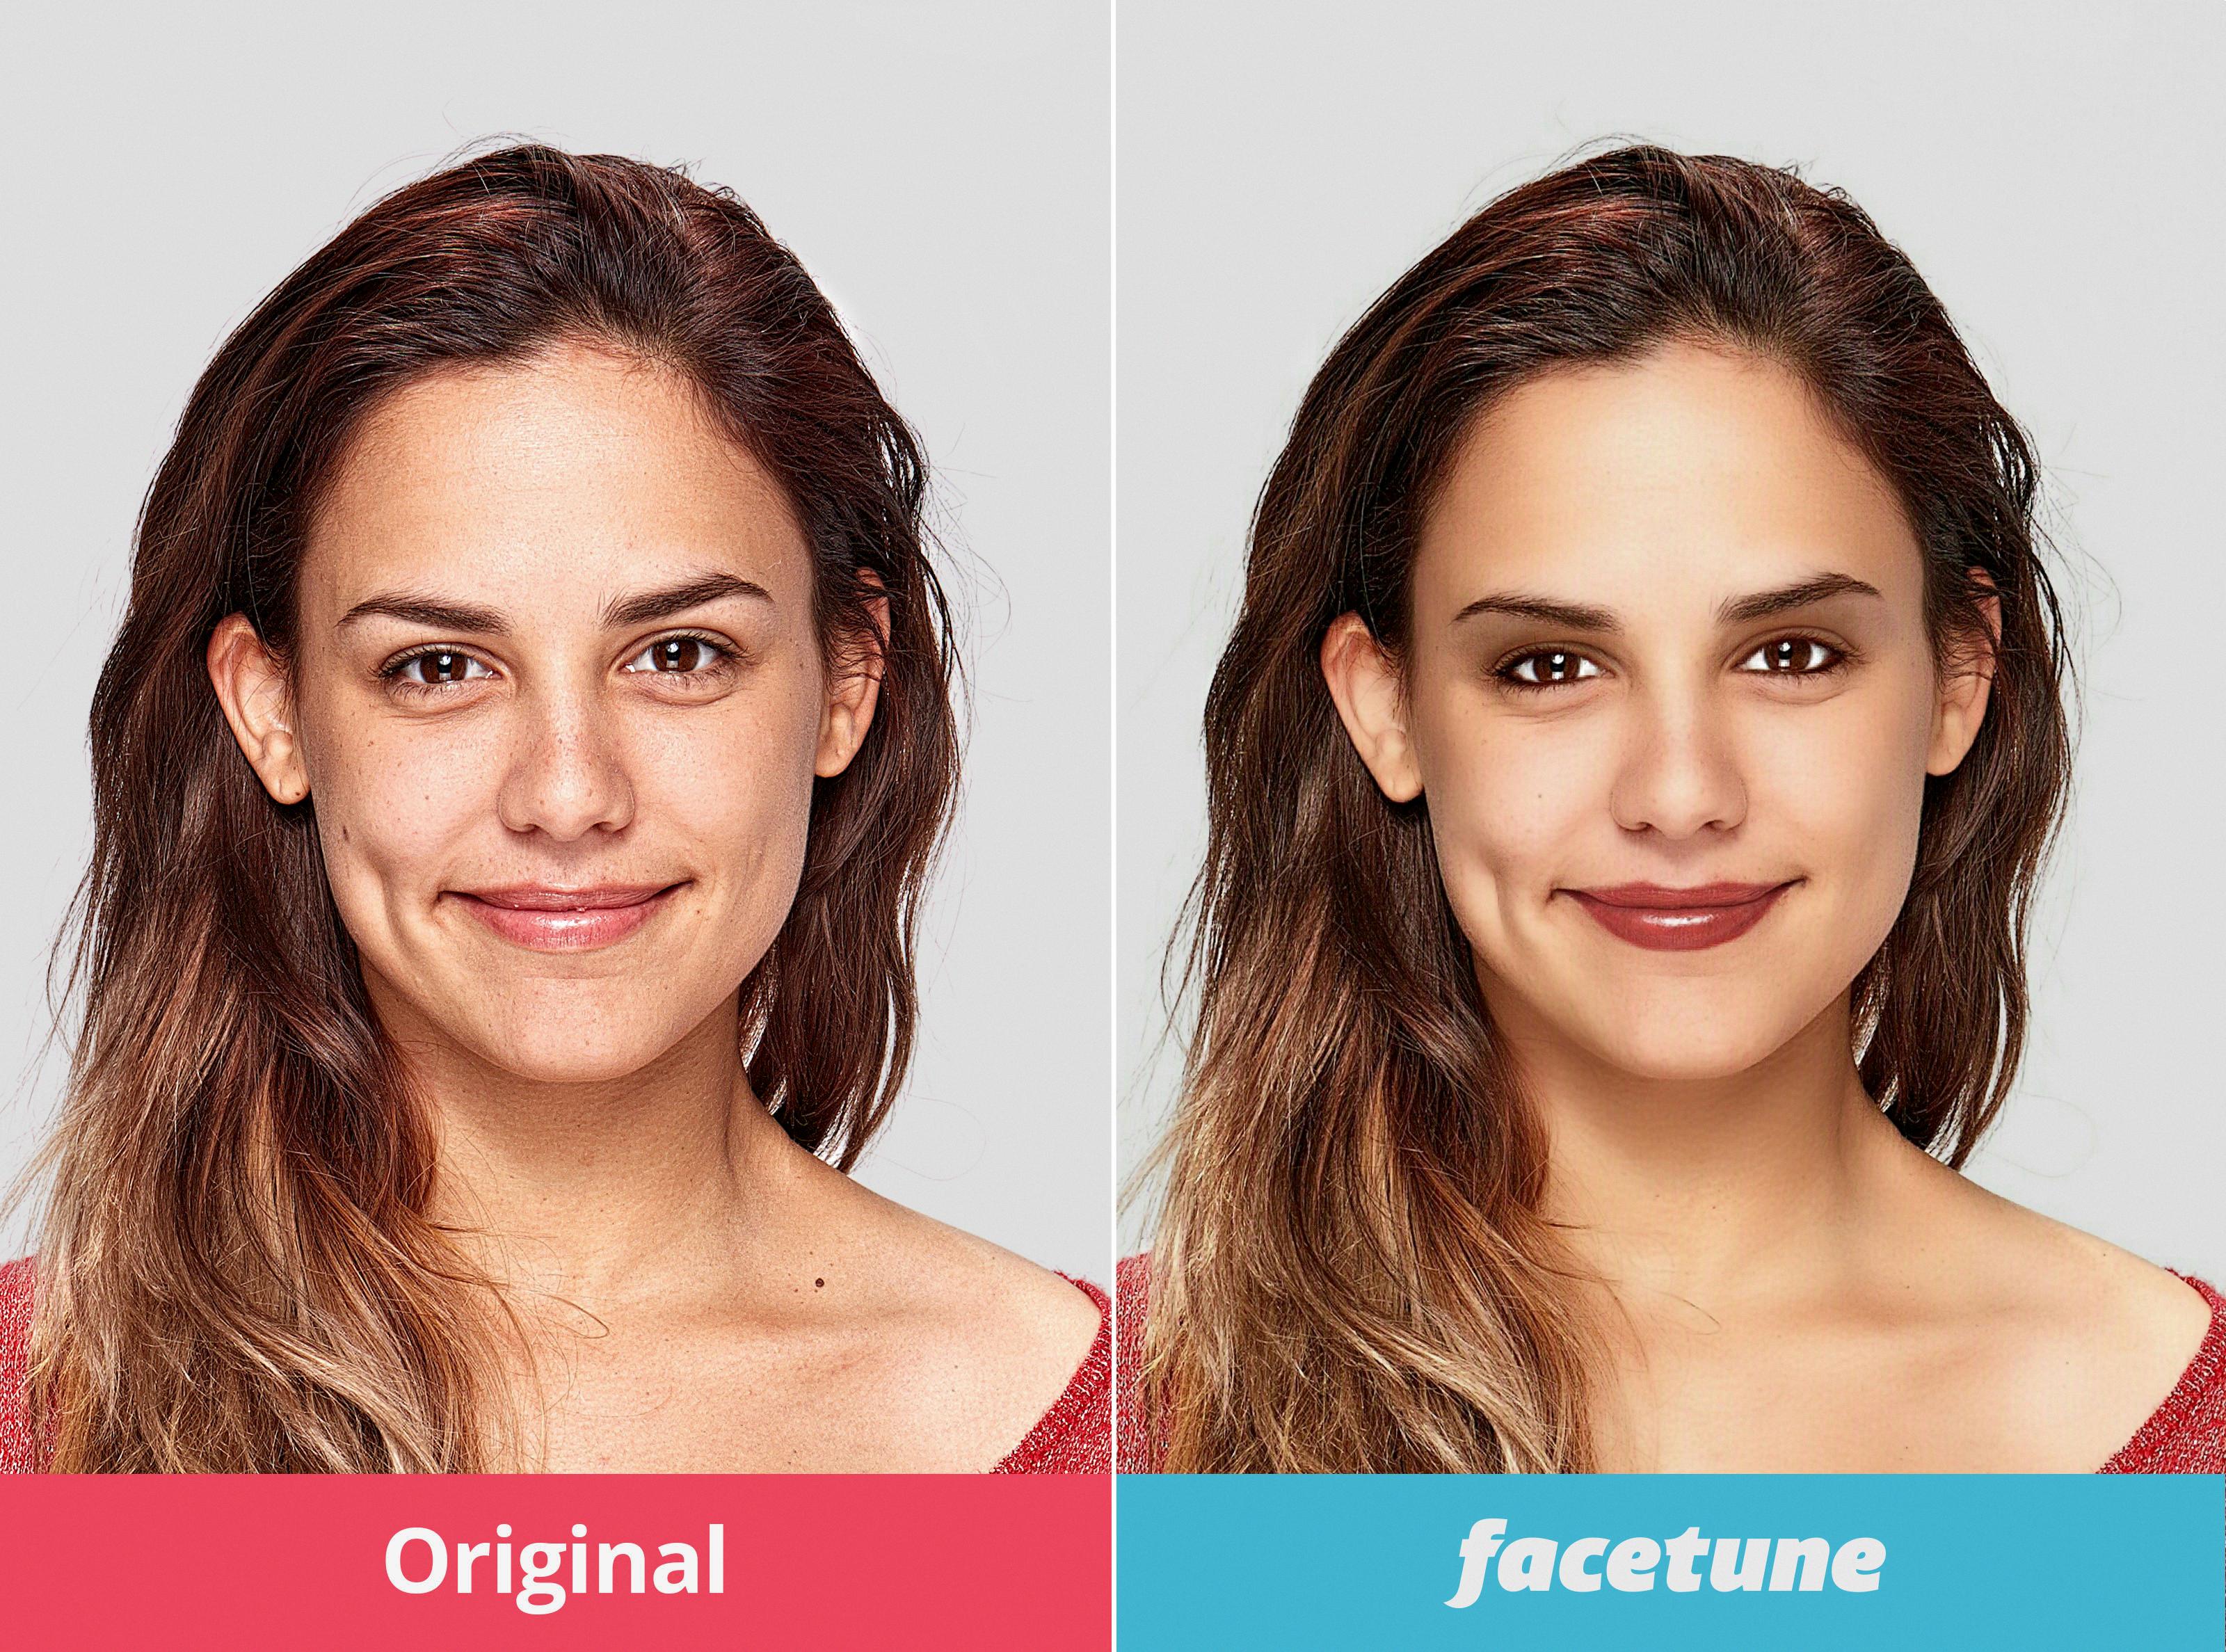 How to Edit Photos With Facetune App? 13